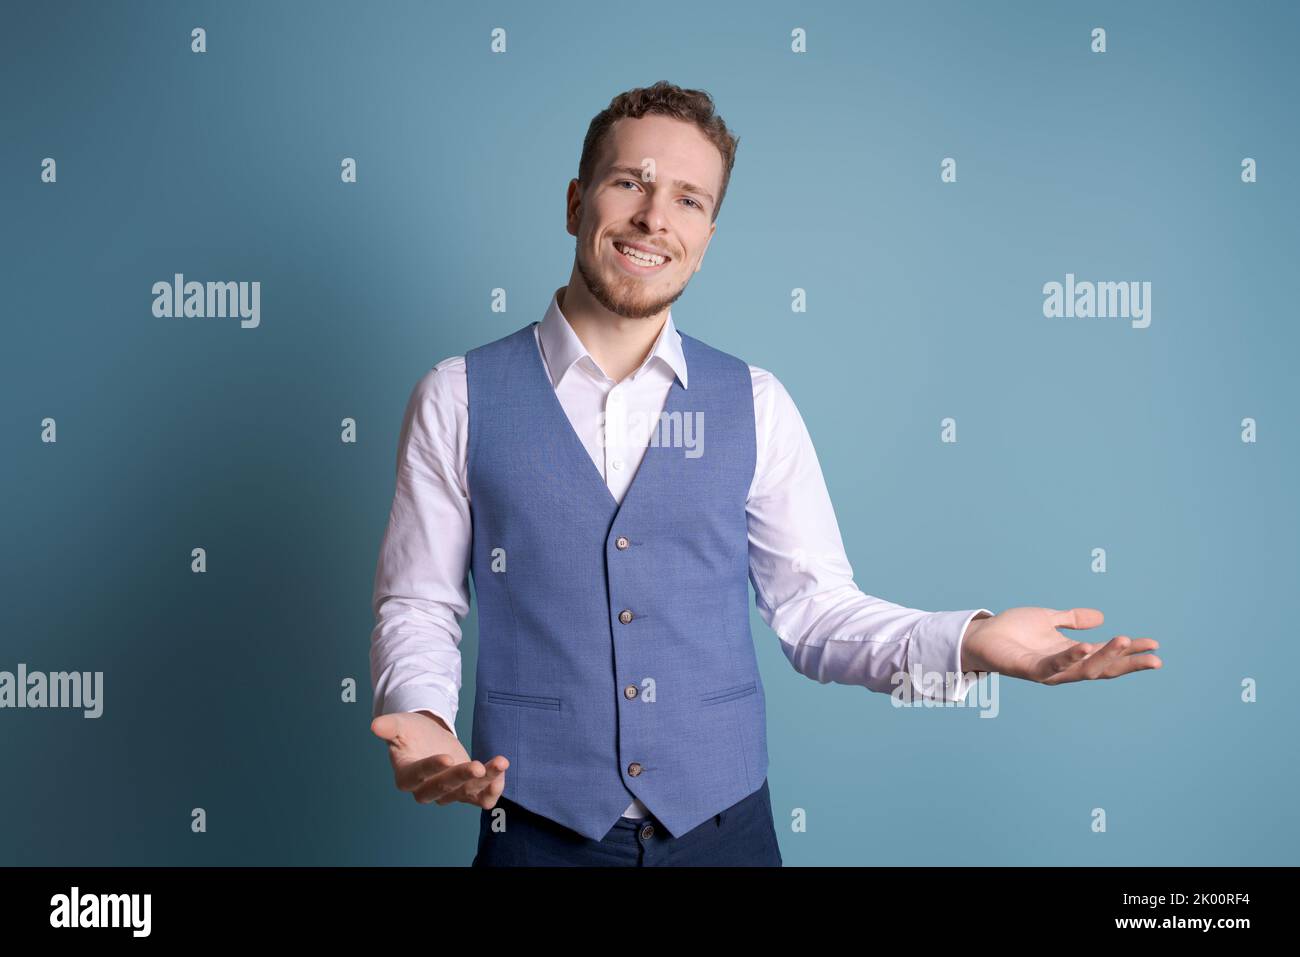 Portrait handsome excited man in business clothes smiling and showing hand gestures at the camera, isolated on blue background, young caucasian man with stubble on his face Stock Photo